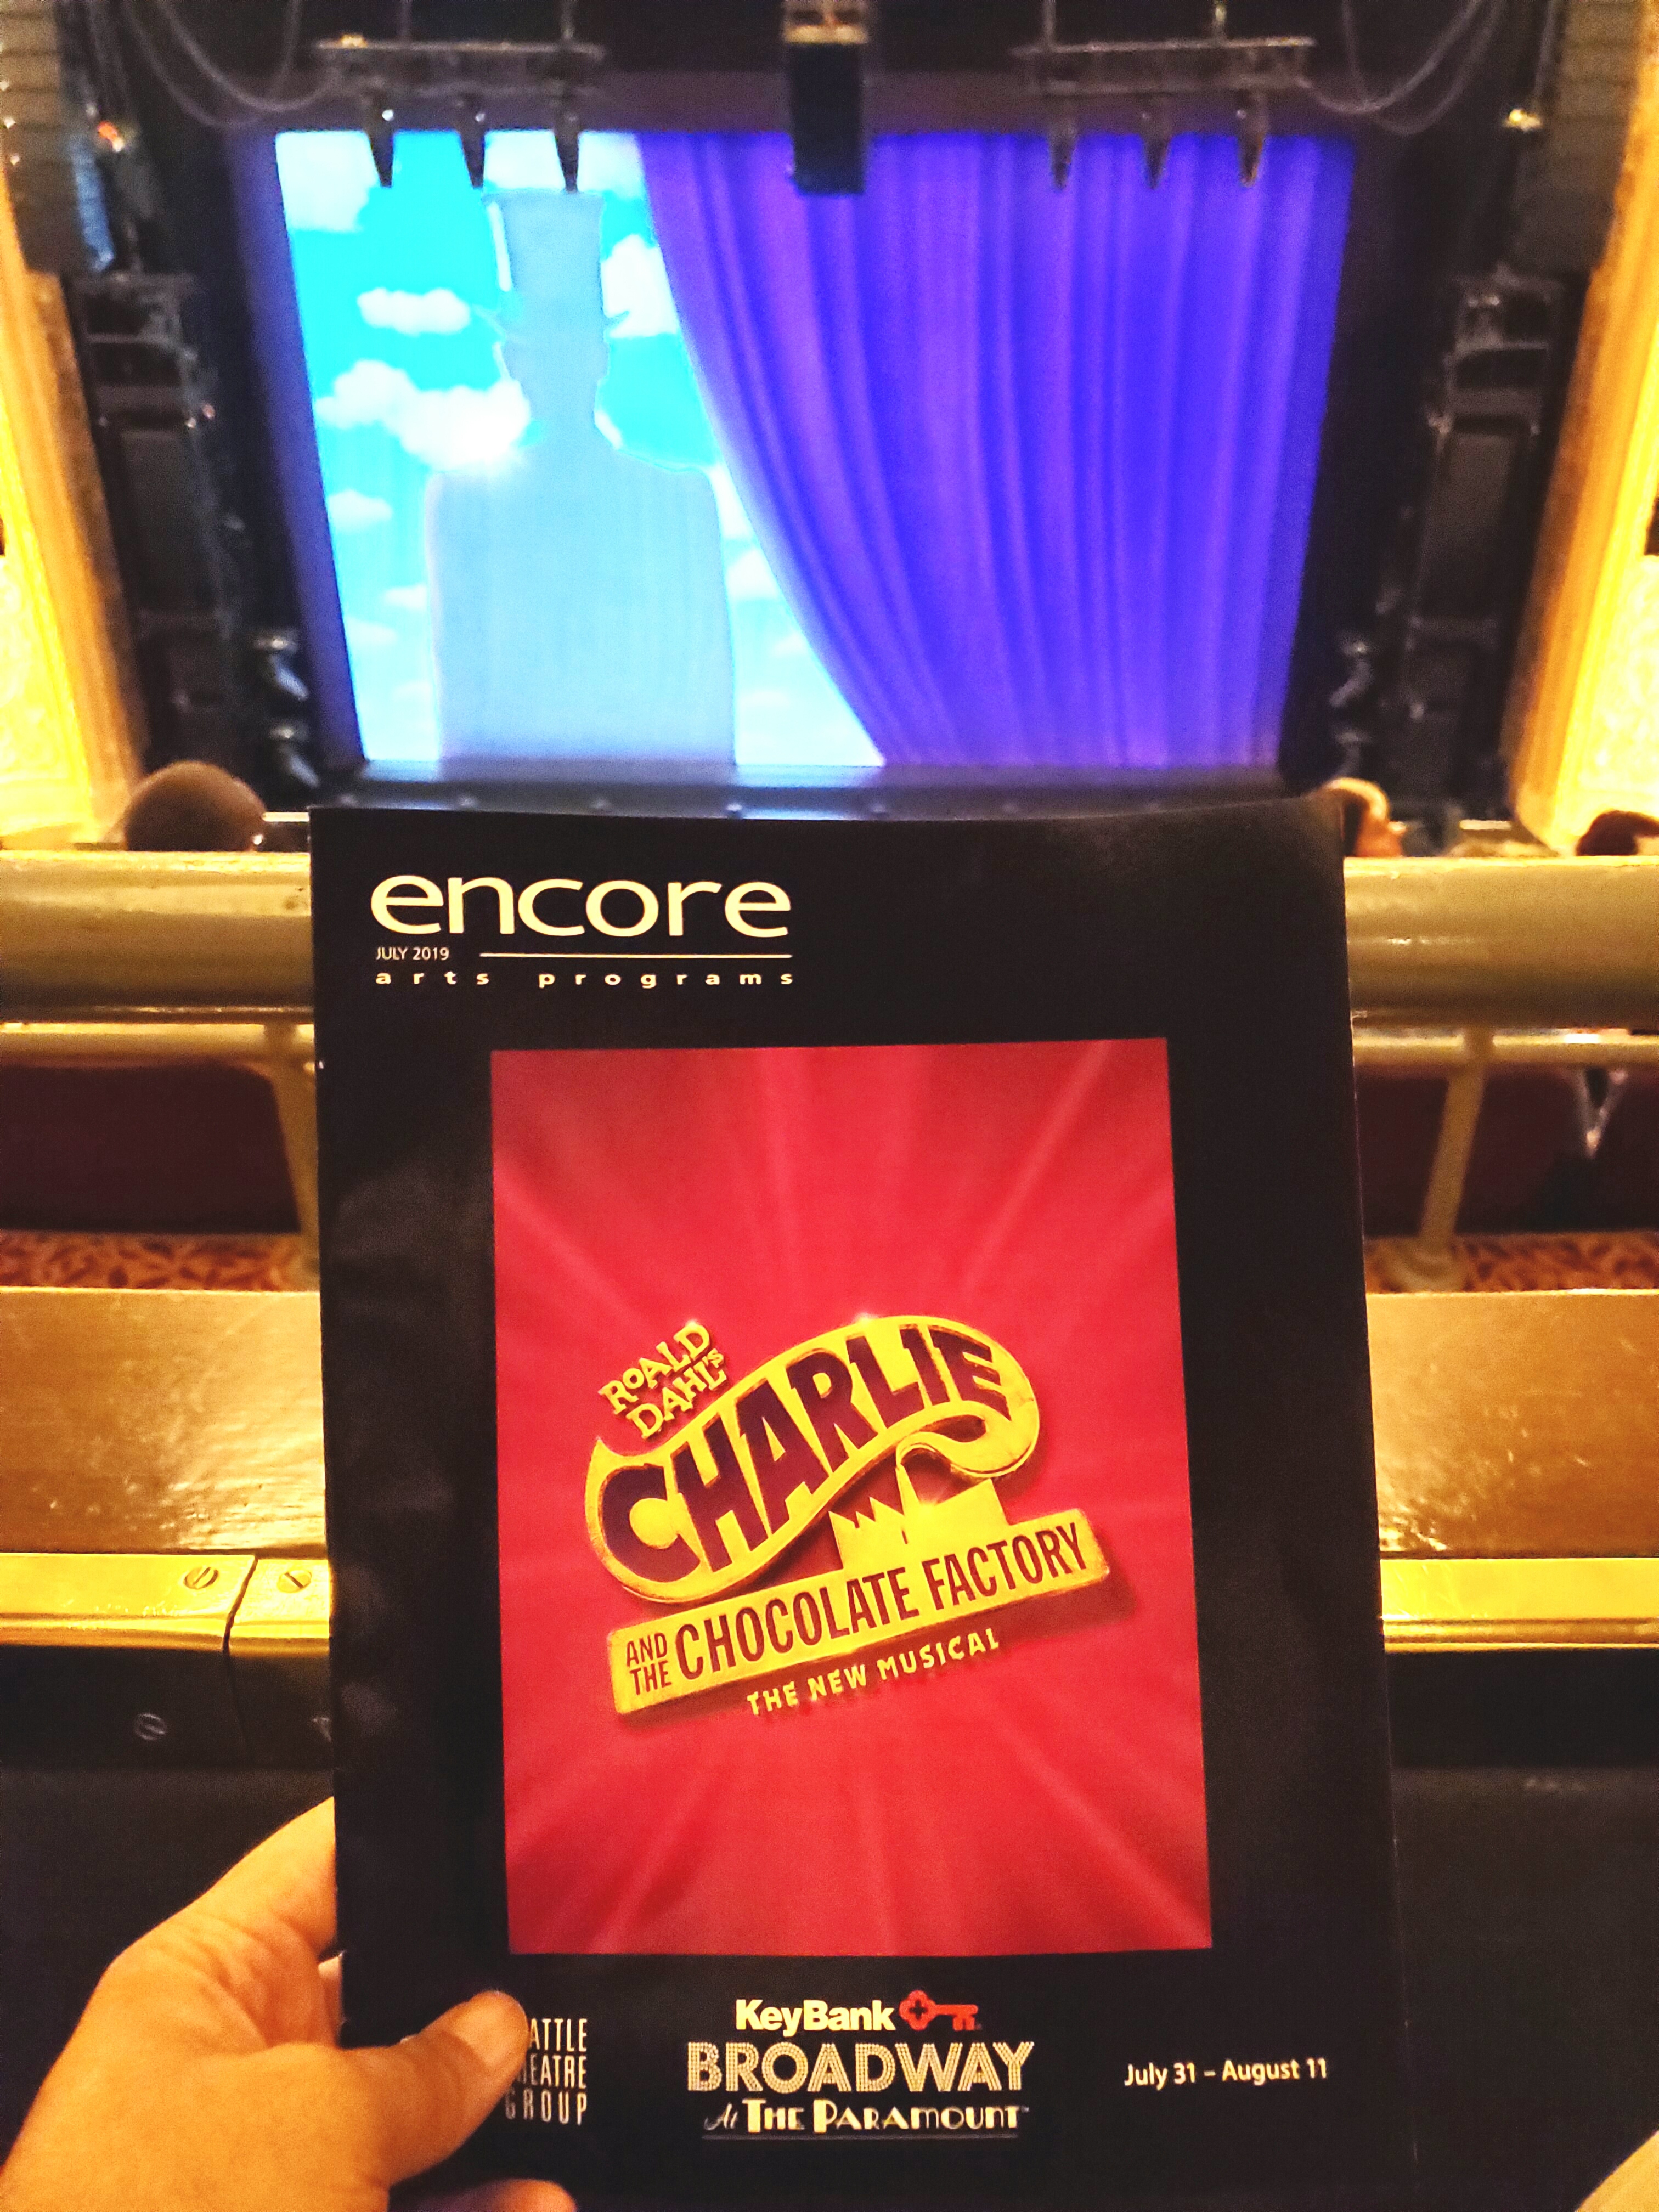 #GoldenTicket to Roald Dahl's Charlie and the Chocolate Factory live #musical adaptation w/ Seattle Theatre Group. Clever #oompaLoompa 